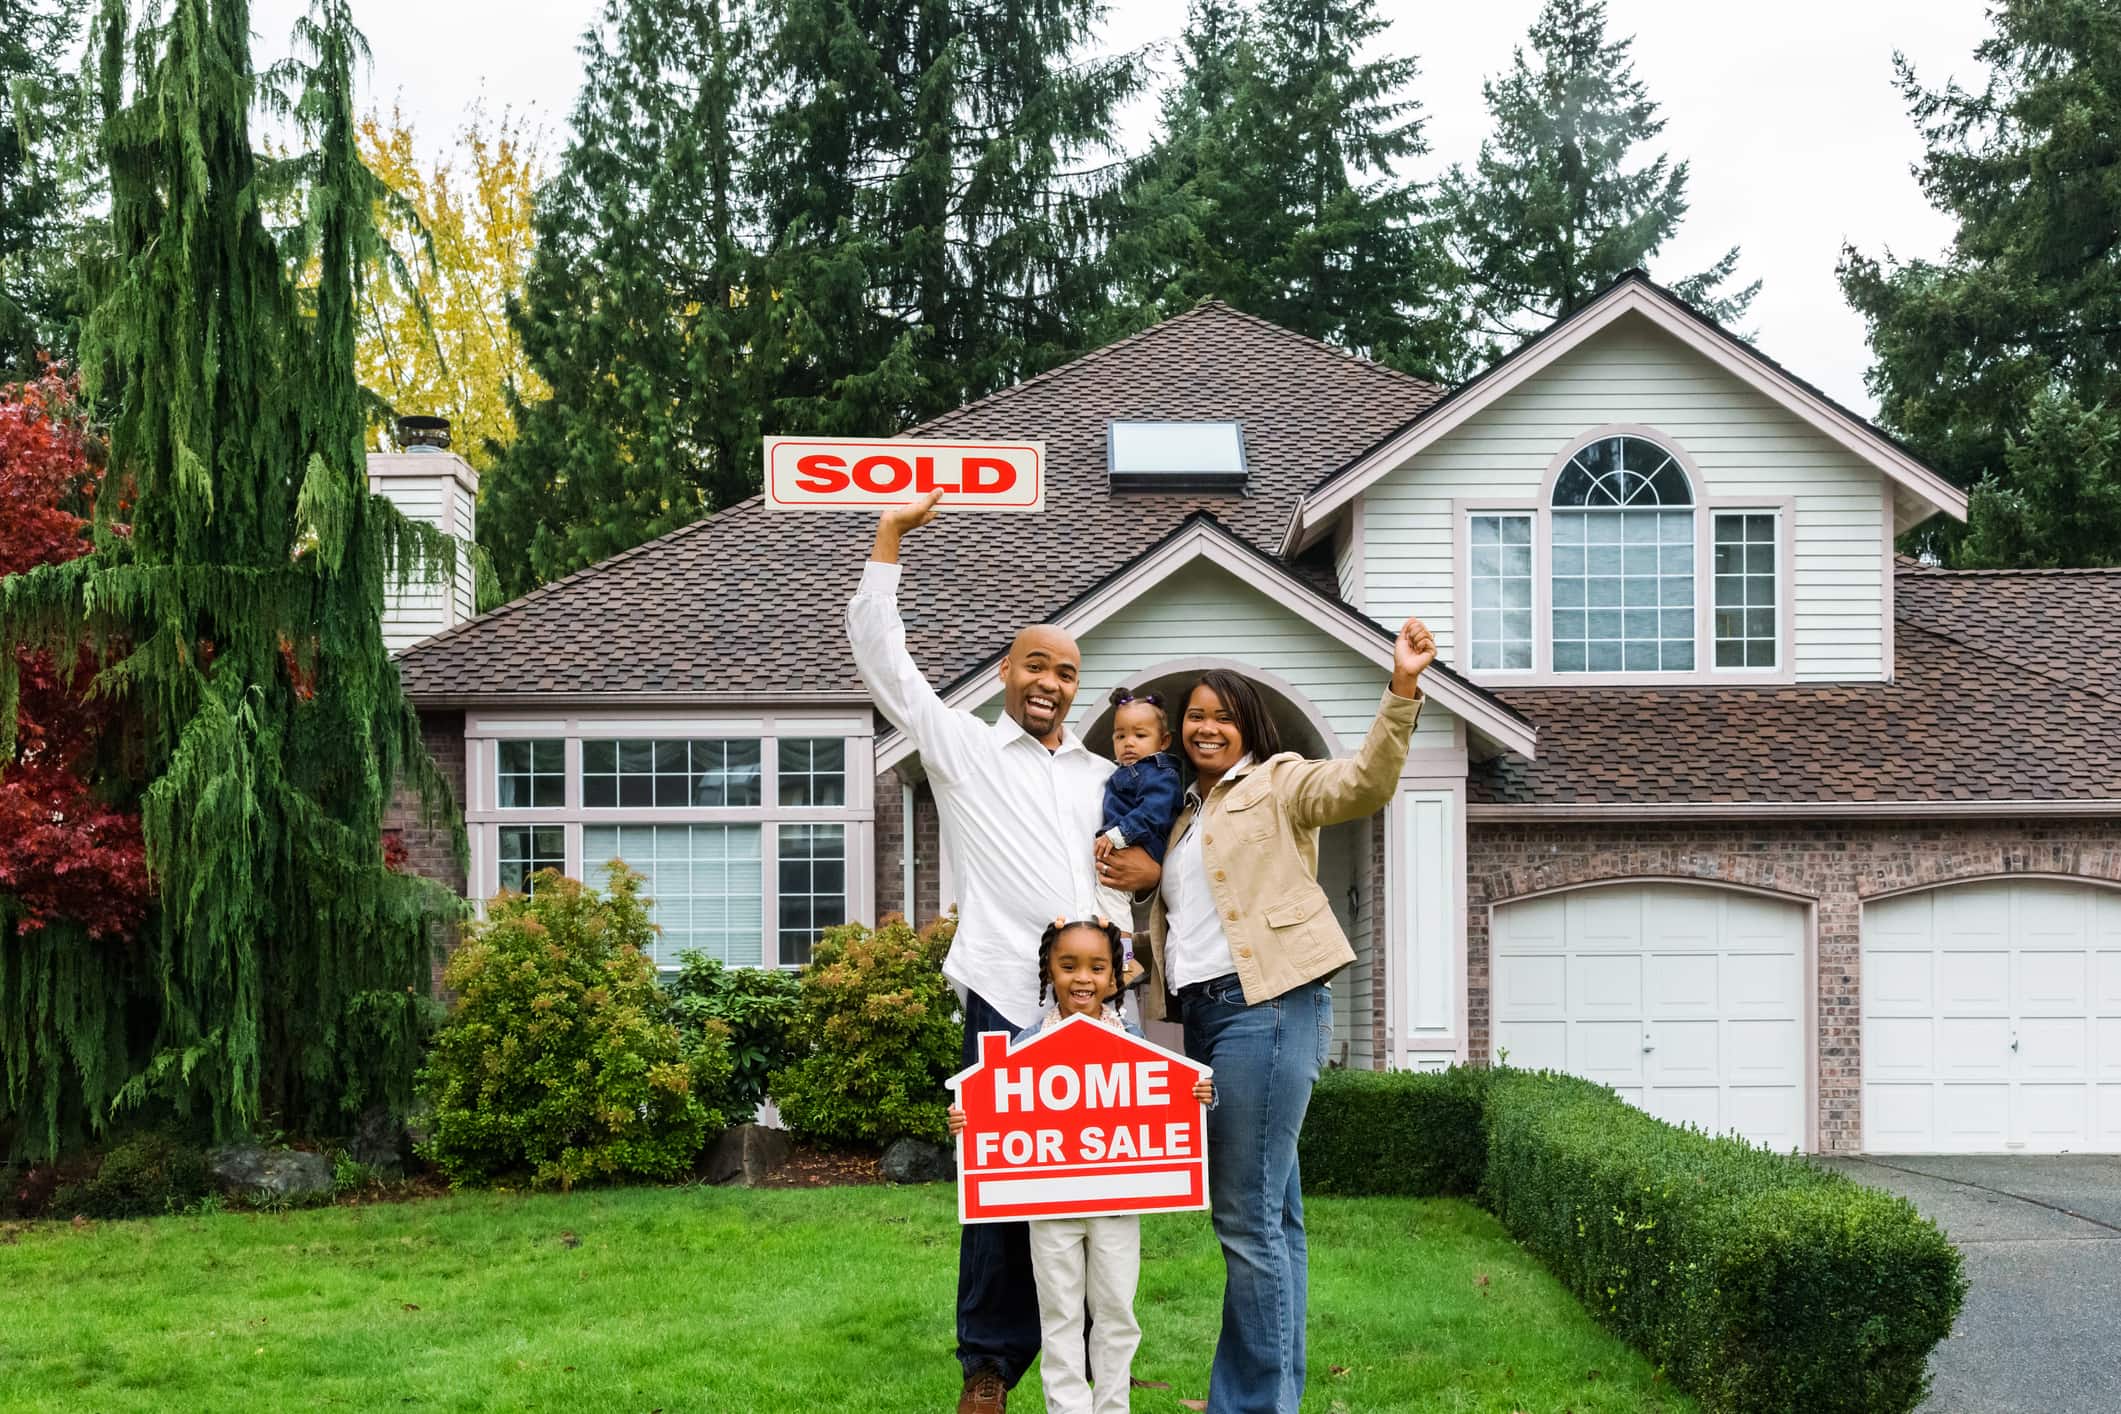 5 Common Reasons to Sell Your Home